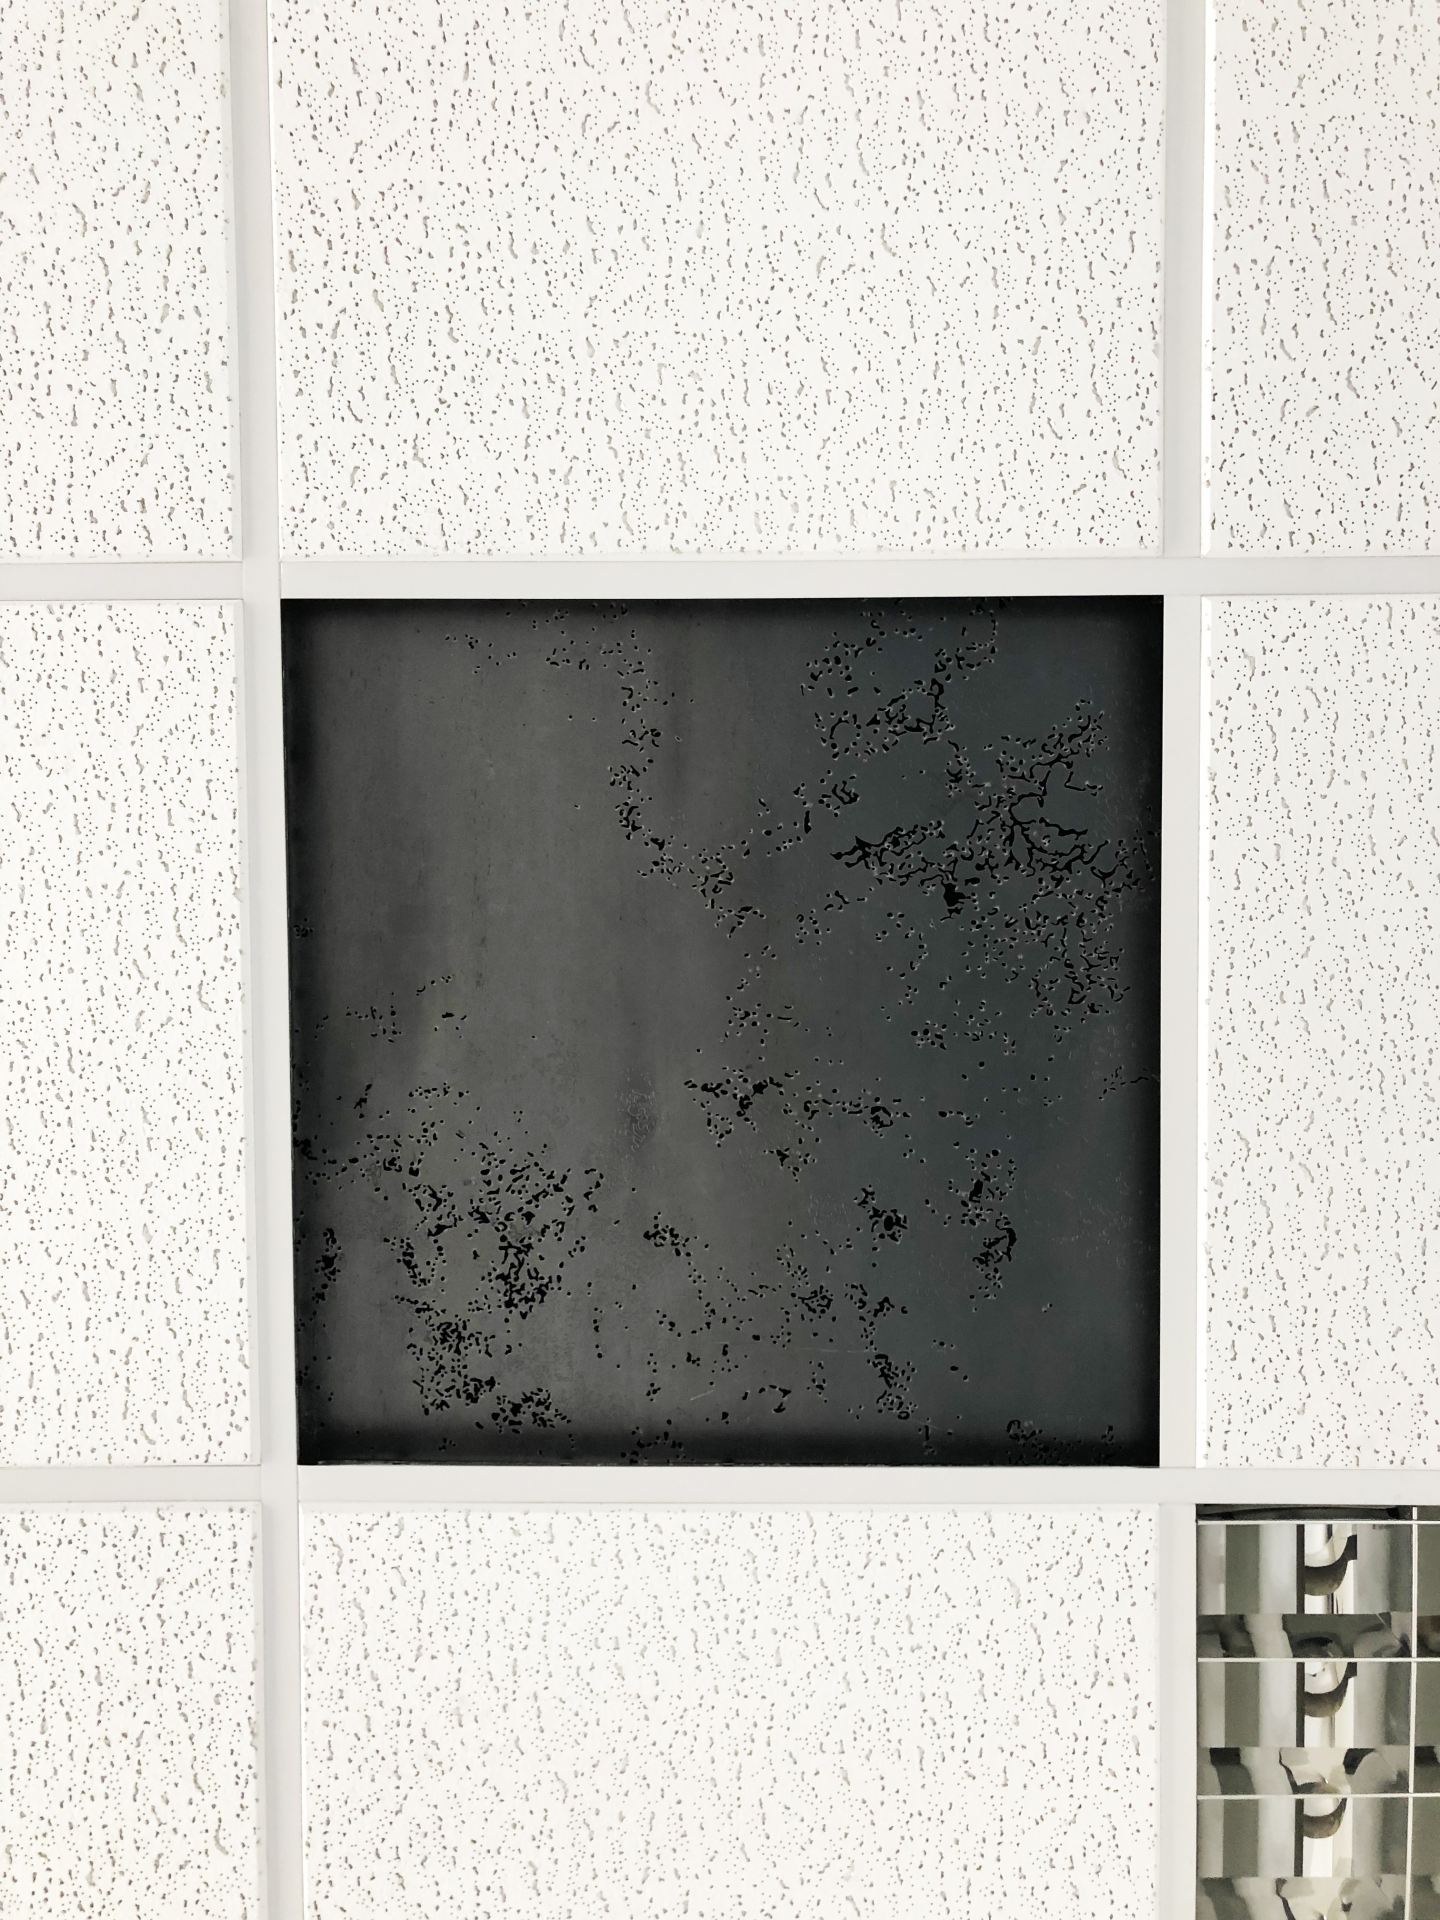 a photo of an institutional panel ceiling, with one panel replace by a black square.